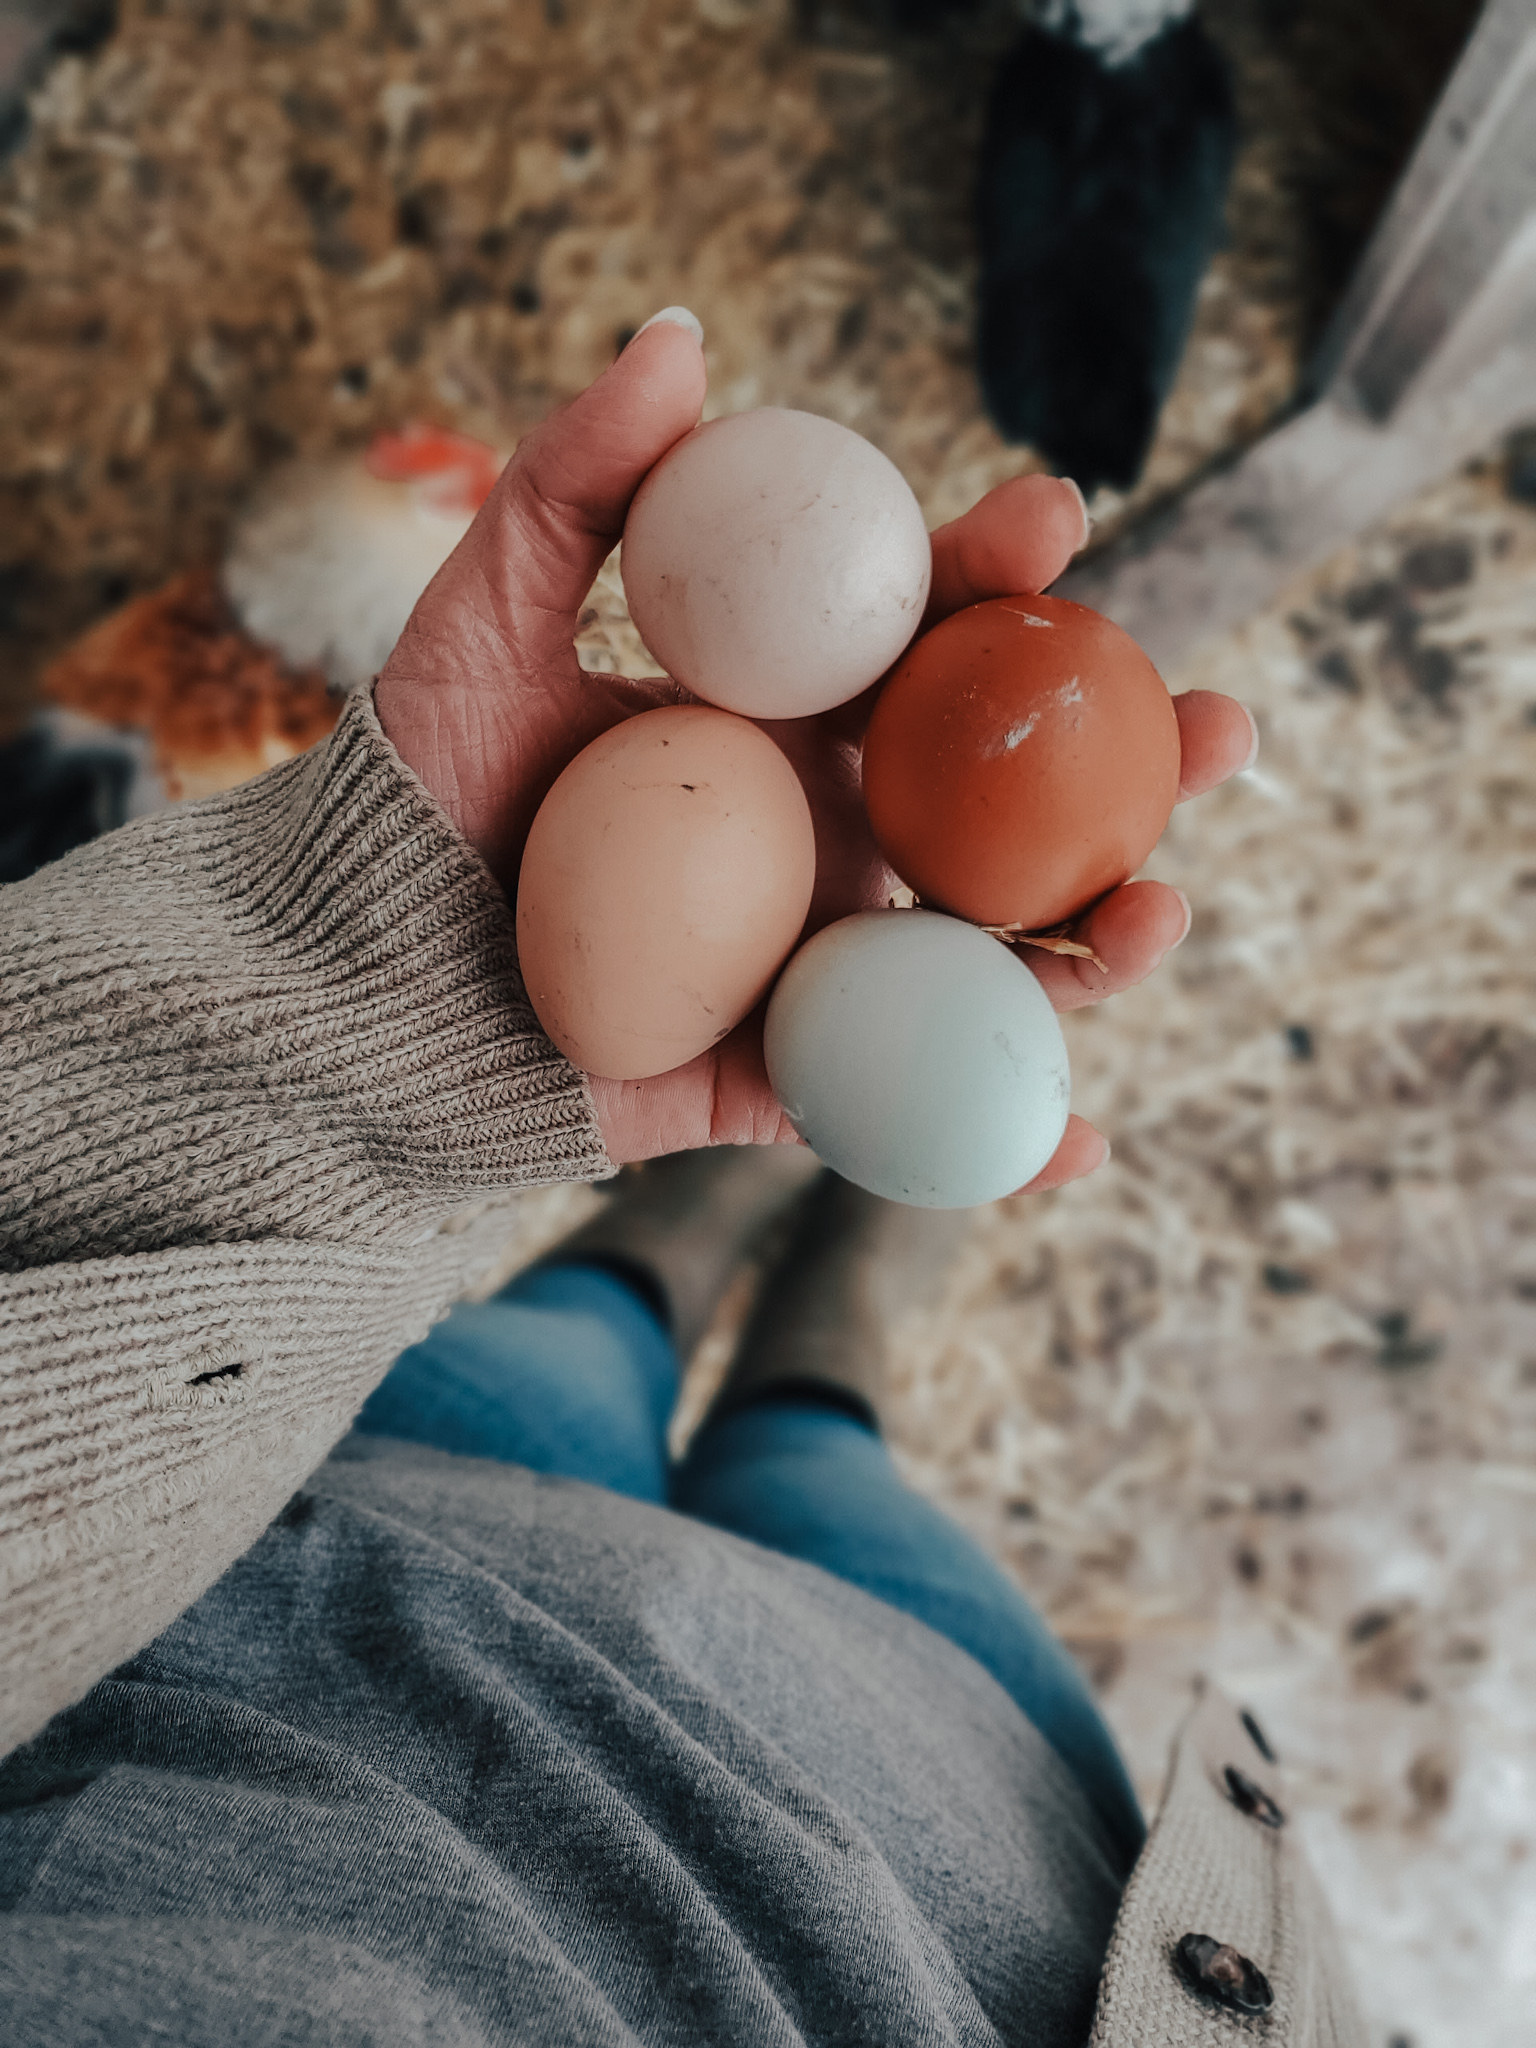 A women holding fresh farm eggs in one hand in a chicken coop